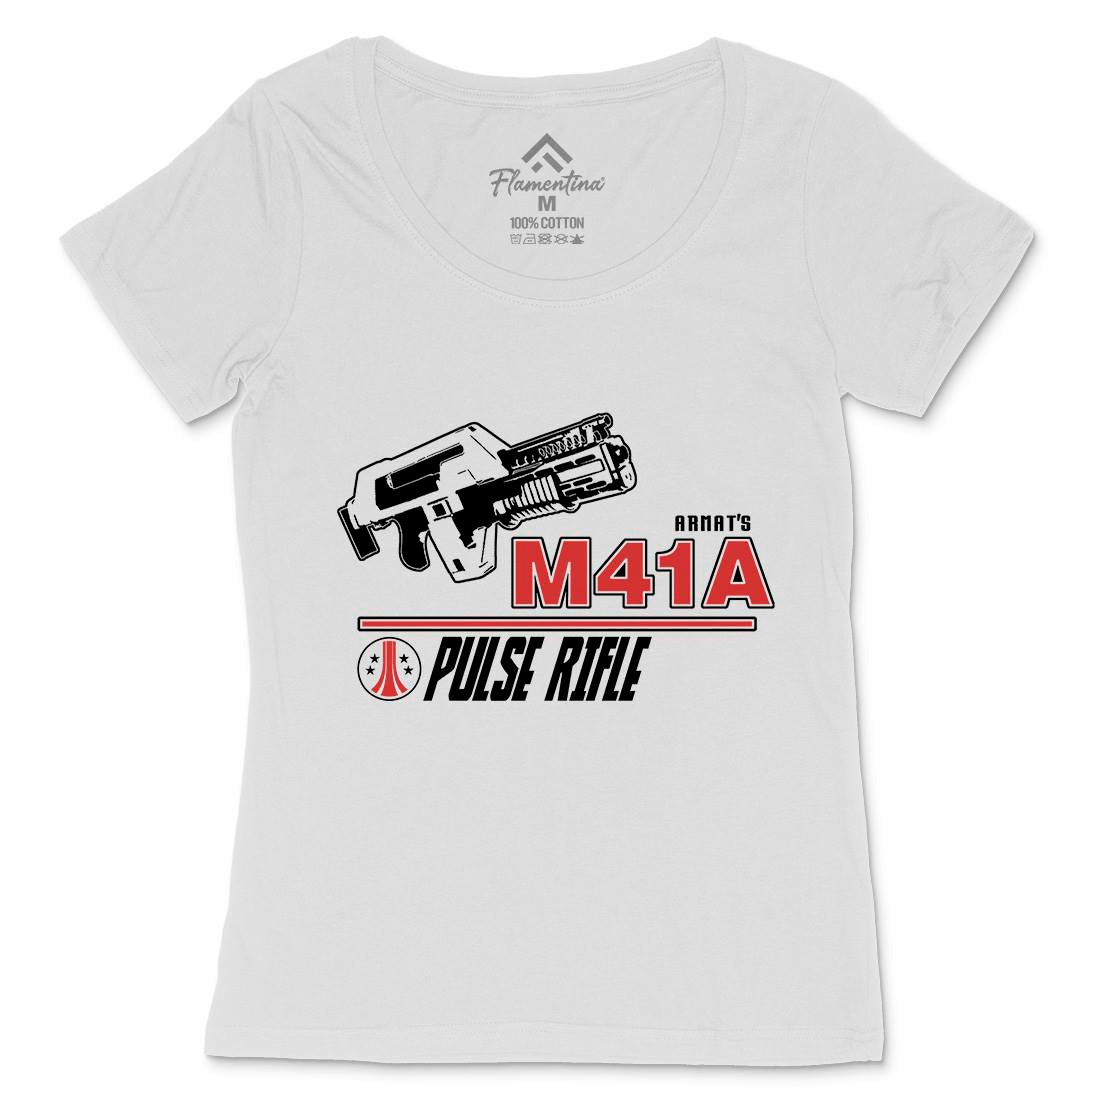 M41A Womens Scoop Neck T-Shirt Army D153